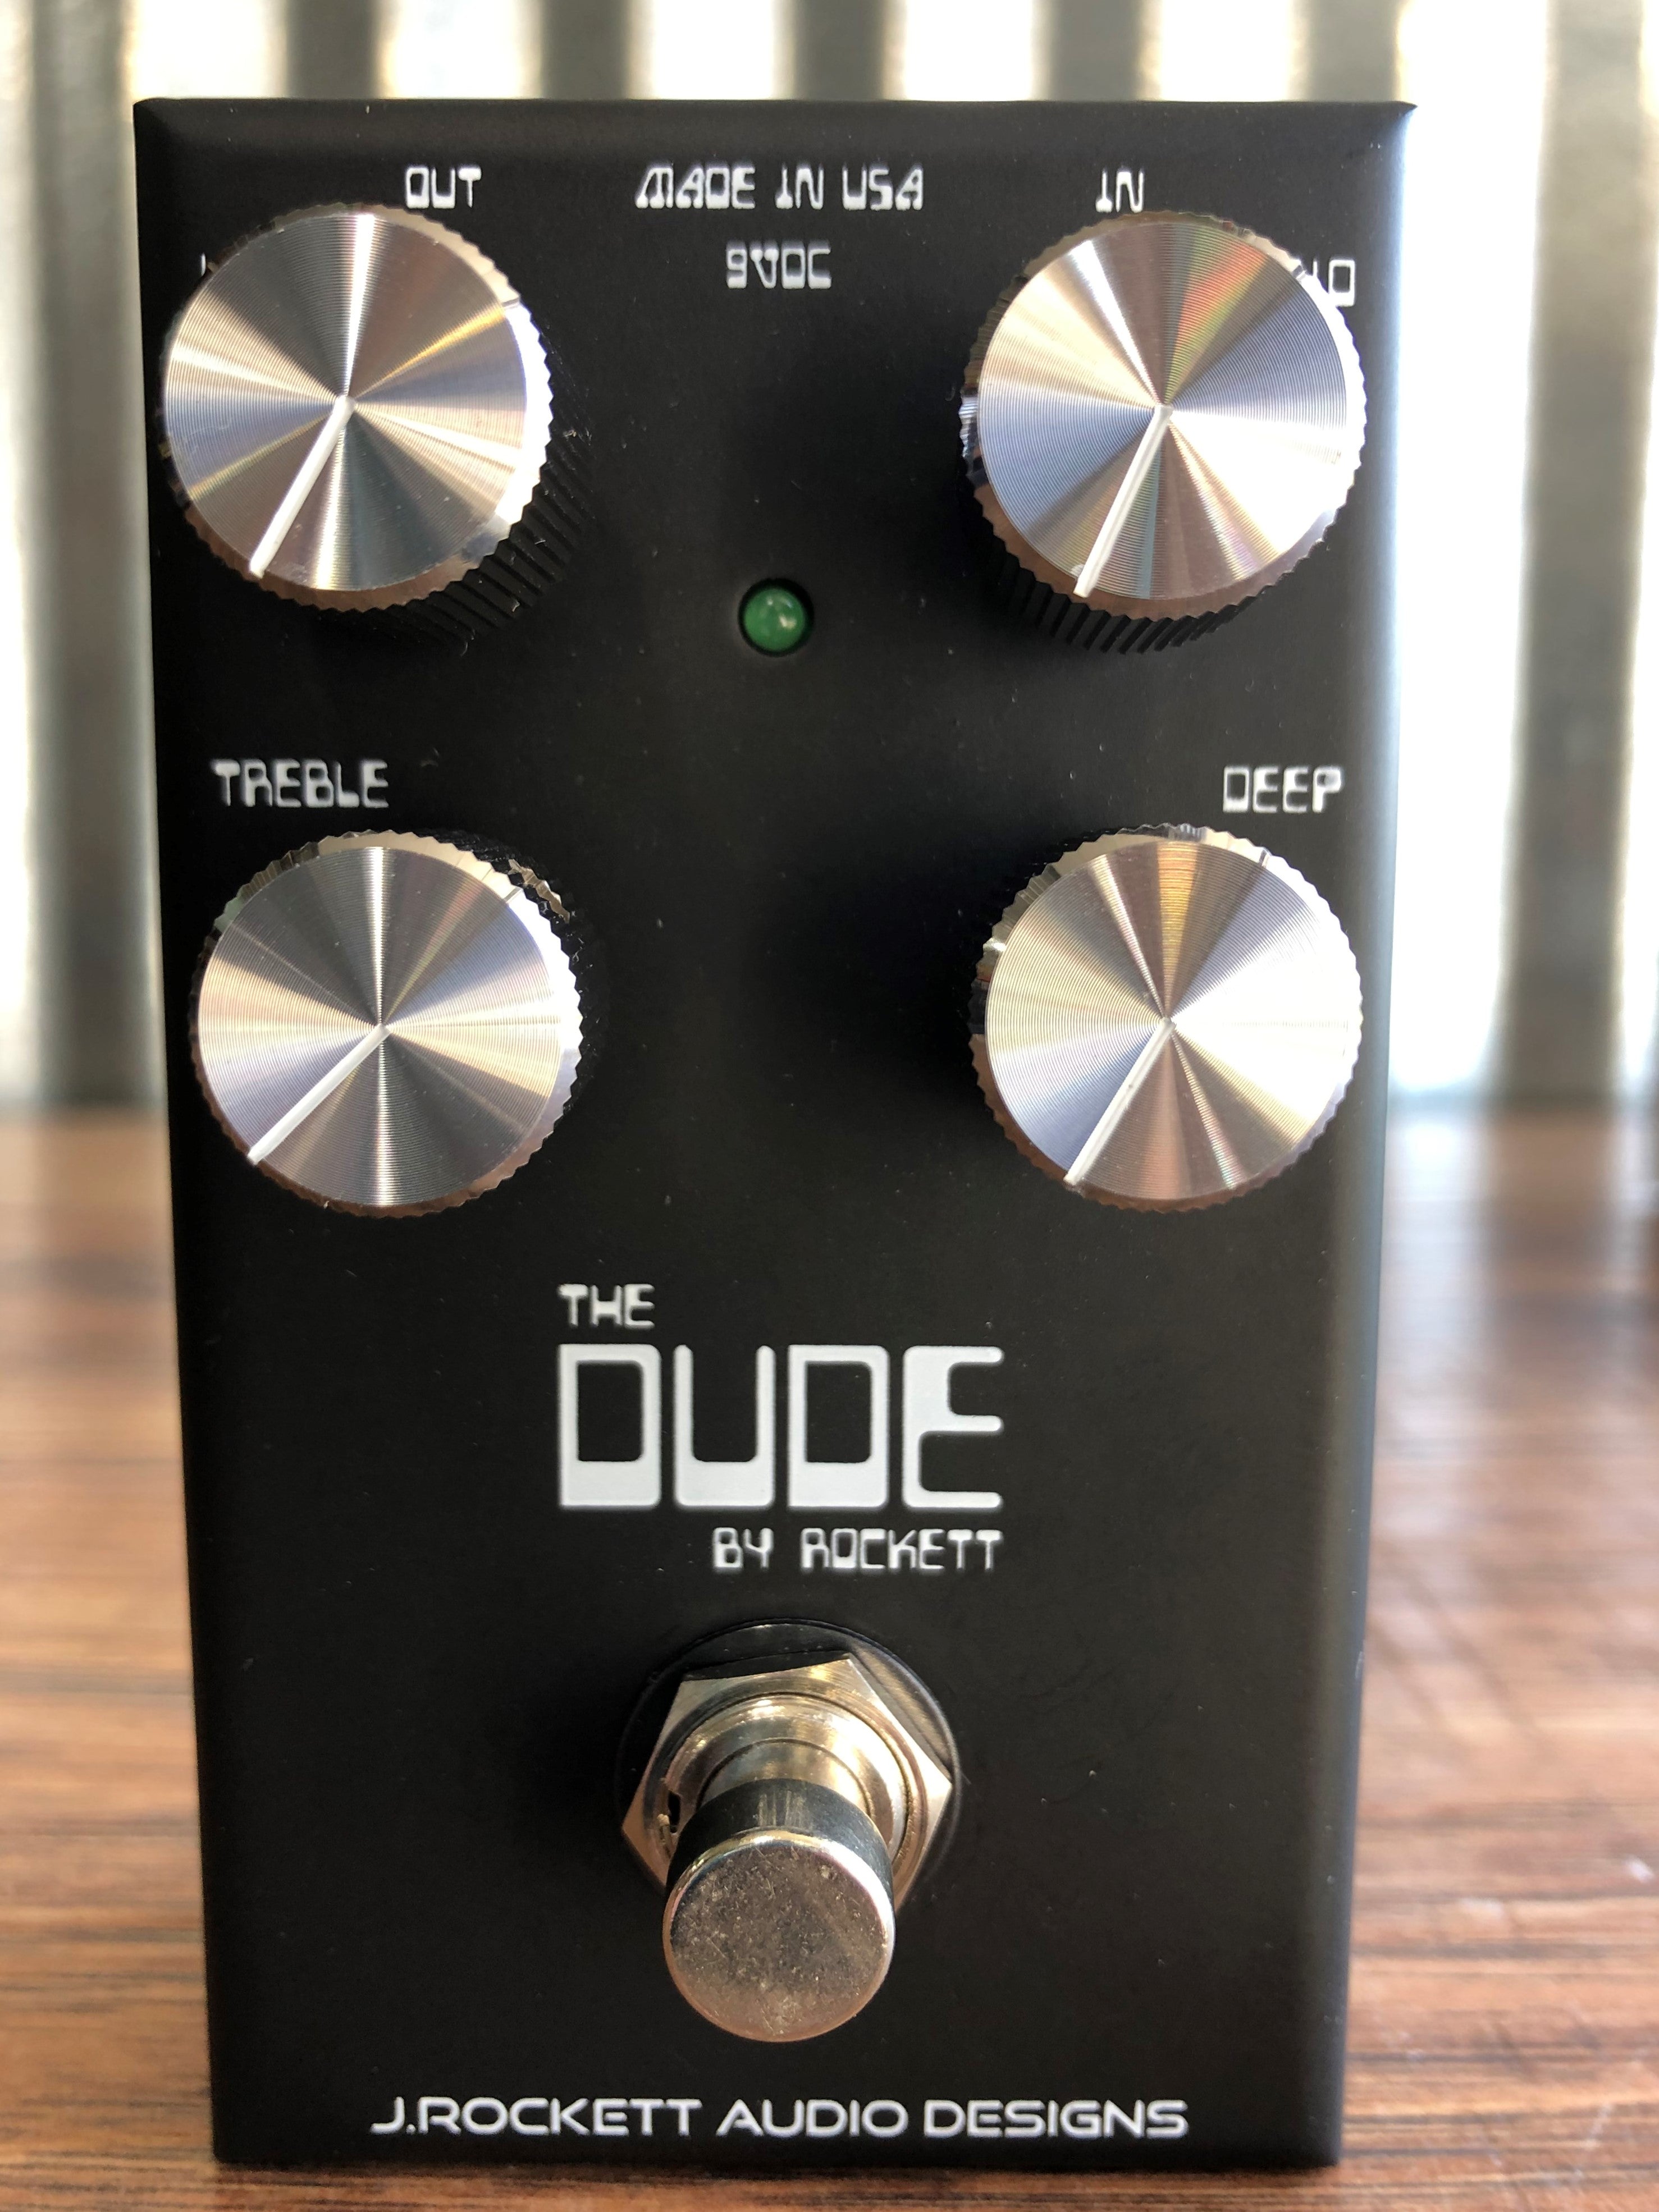 J.　Effect　Rockett　Audio　V2　Designs　–　Pedal　Dude　The　Overdrive　Guitar　Dem　Specialty　Traders